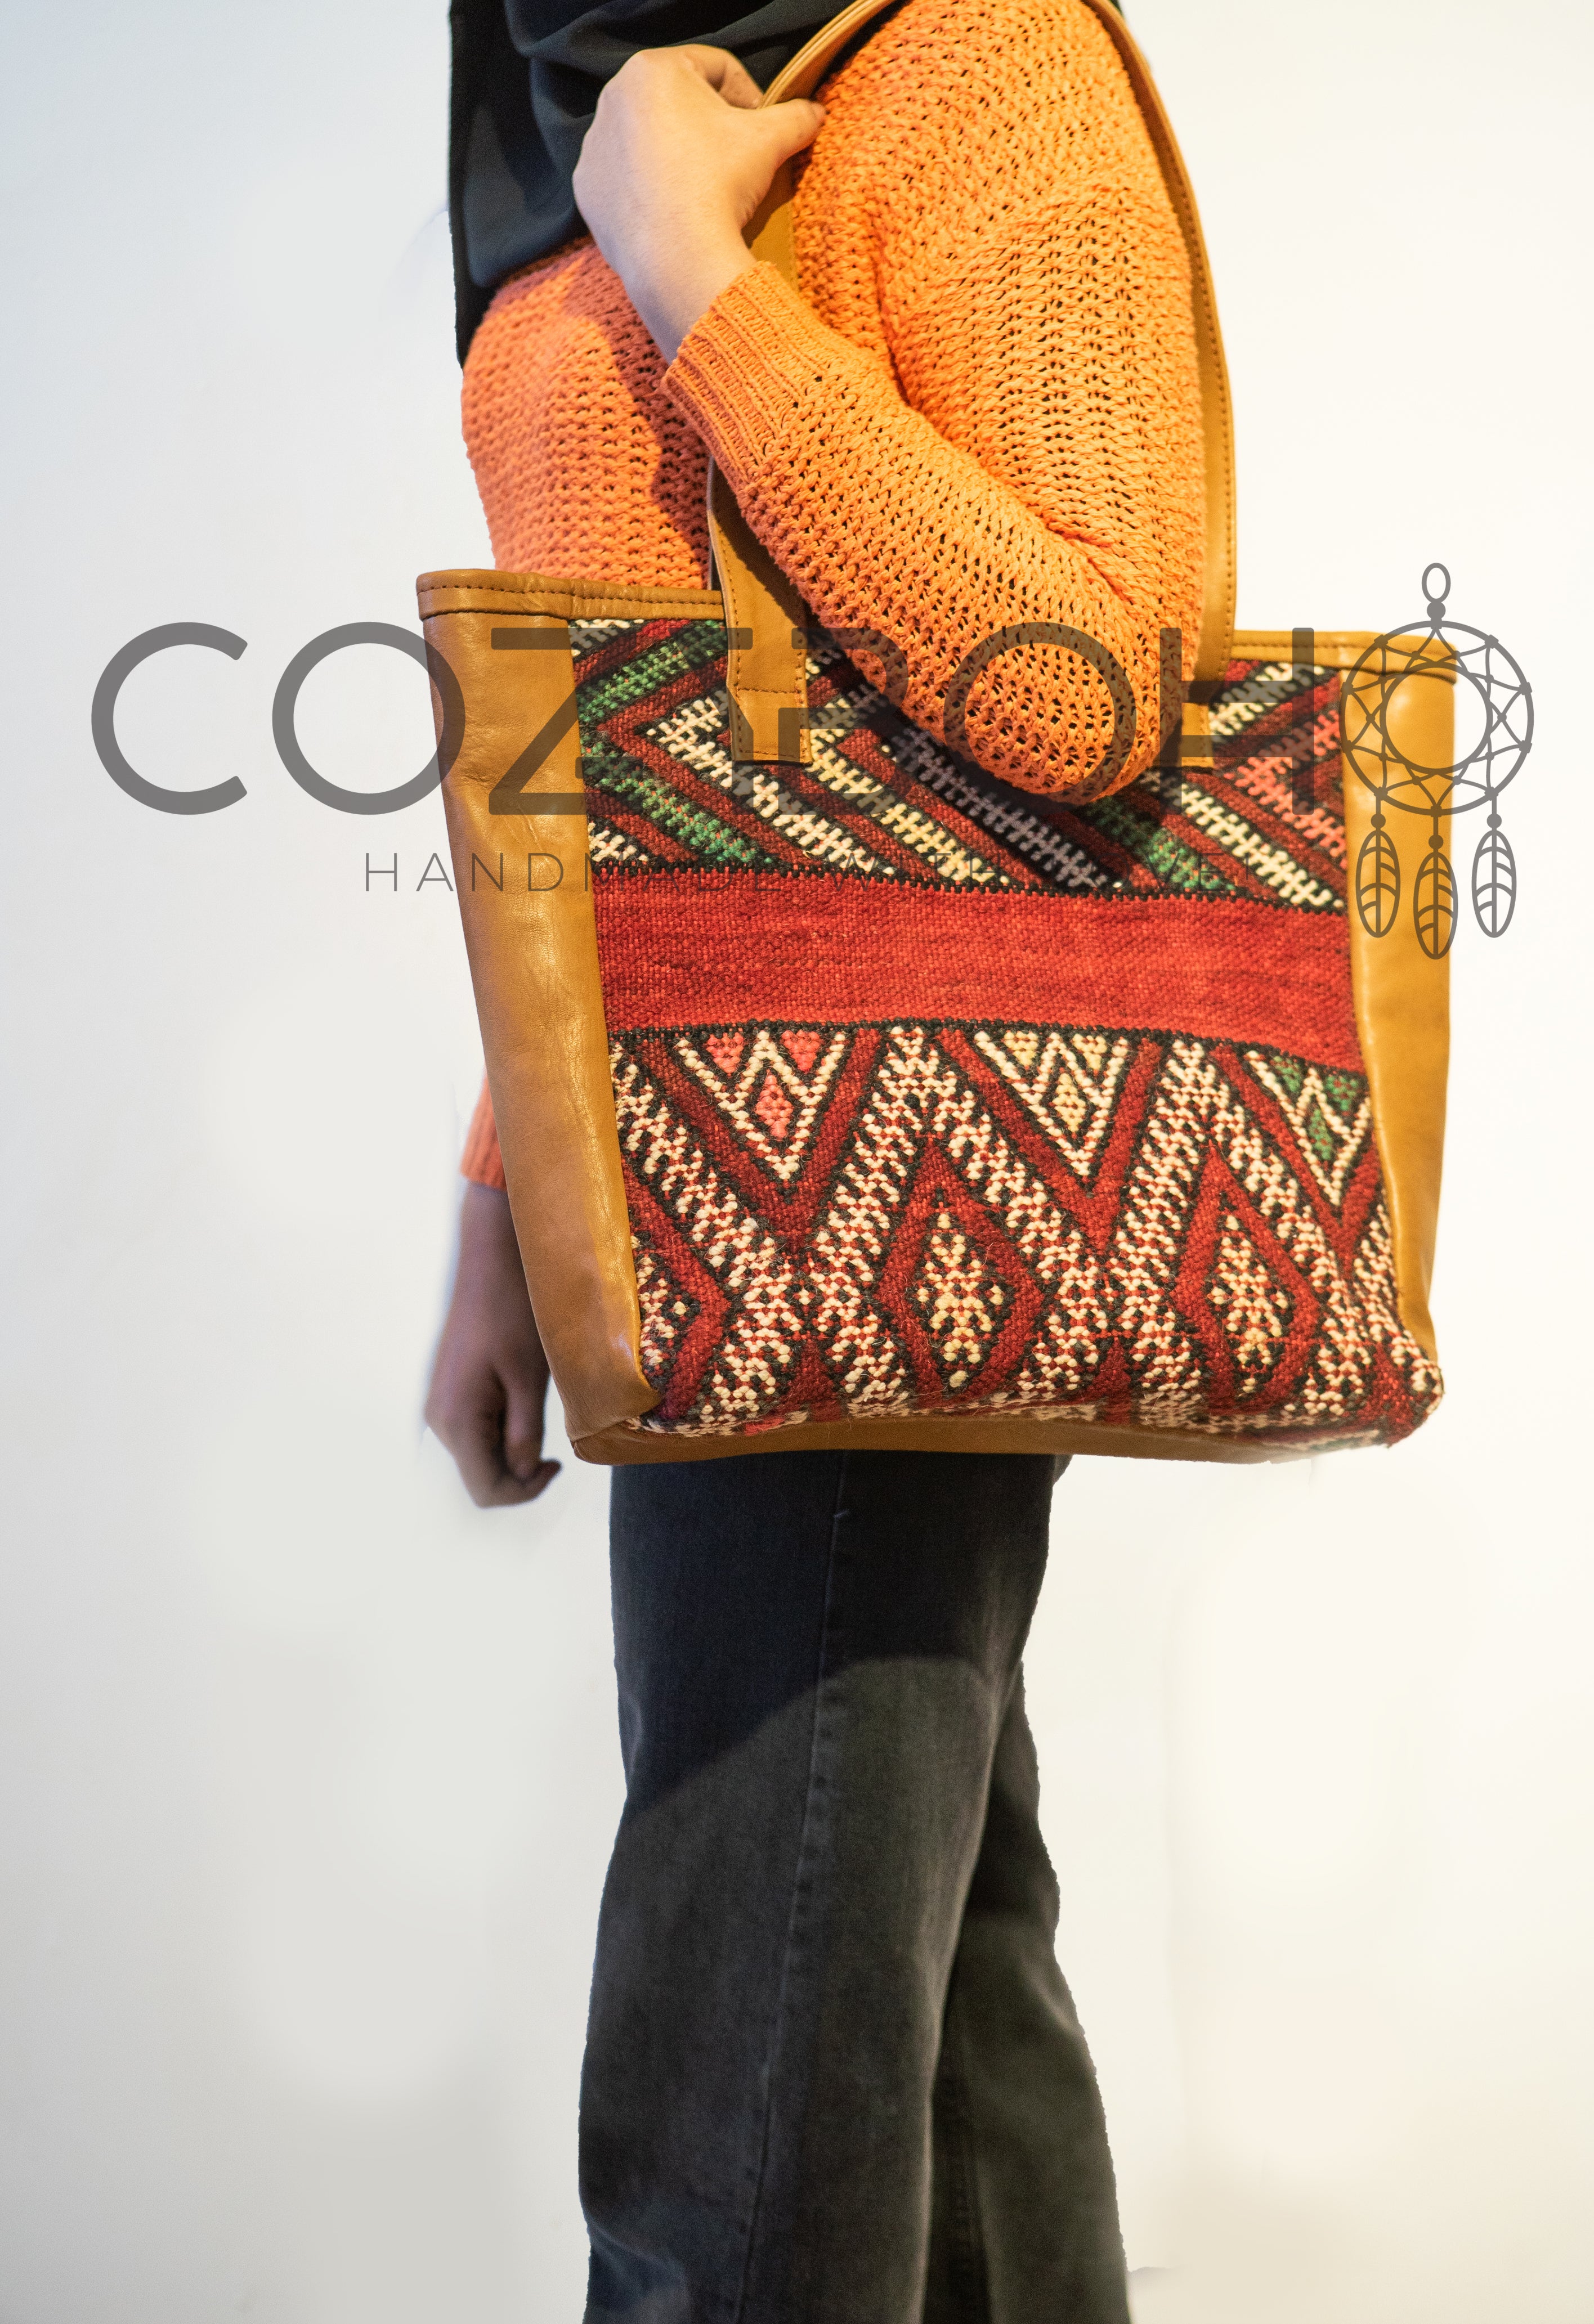 CozyBoho™ Moroccan Leather Tote Bag CB0013